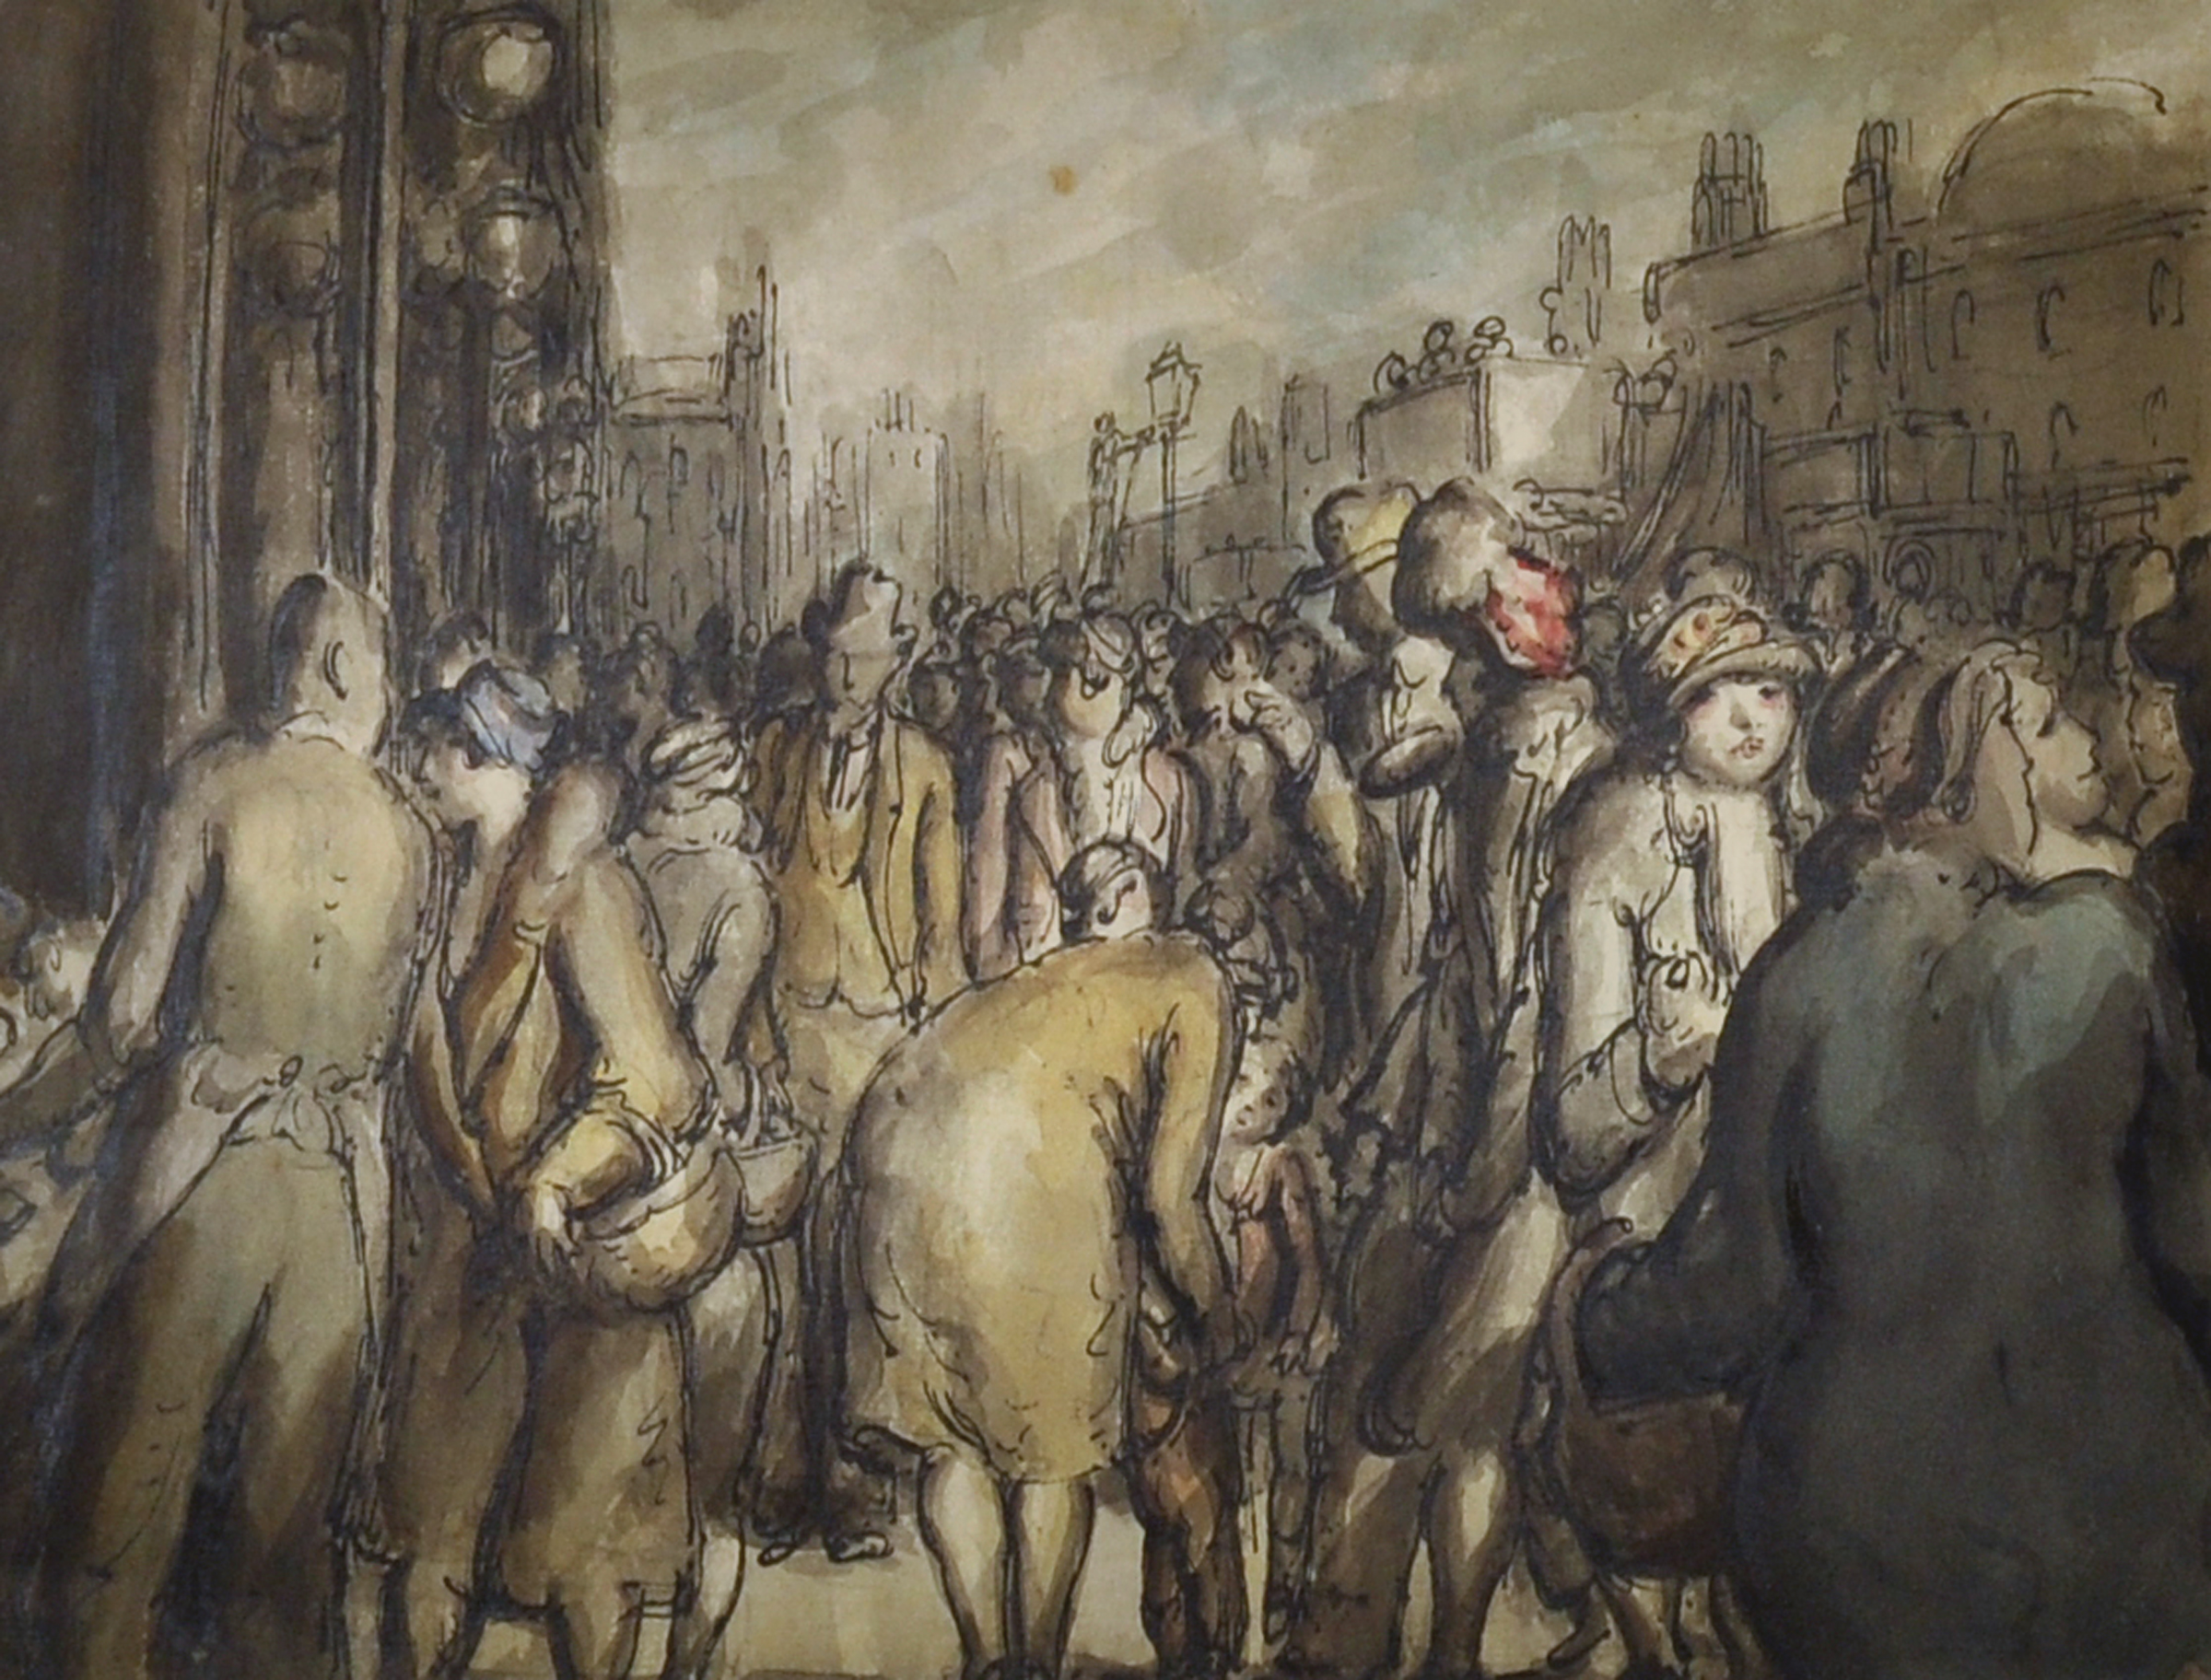 Harold Hope Read (1881-1959) British. A Busy Street Scene with Figures, Watercolour, 9.25" x 12.